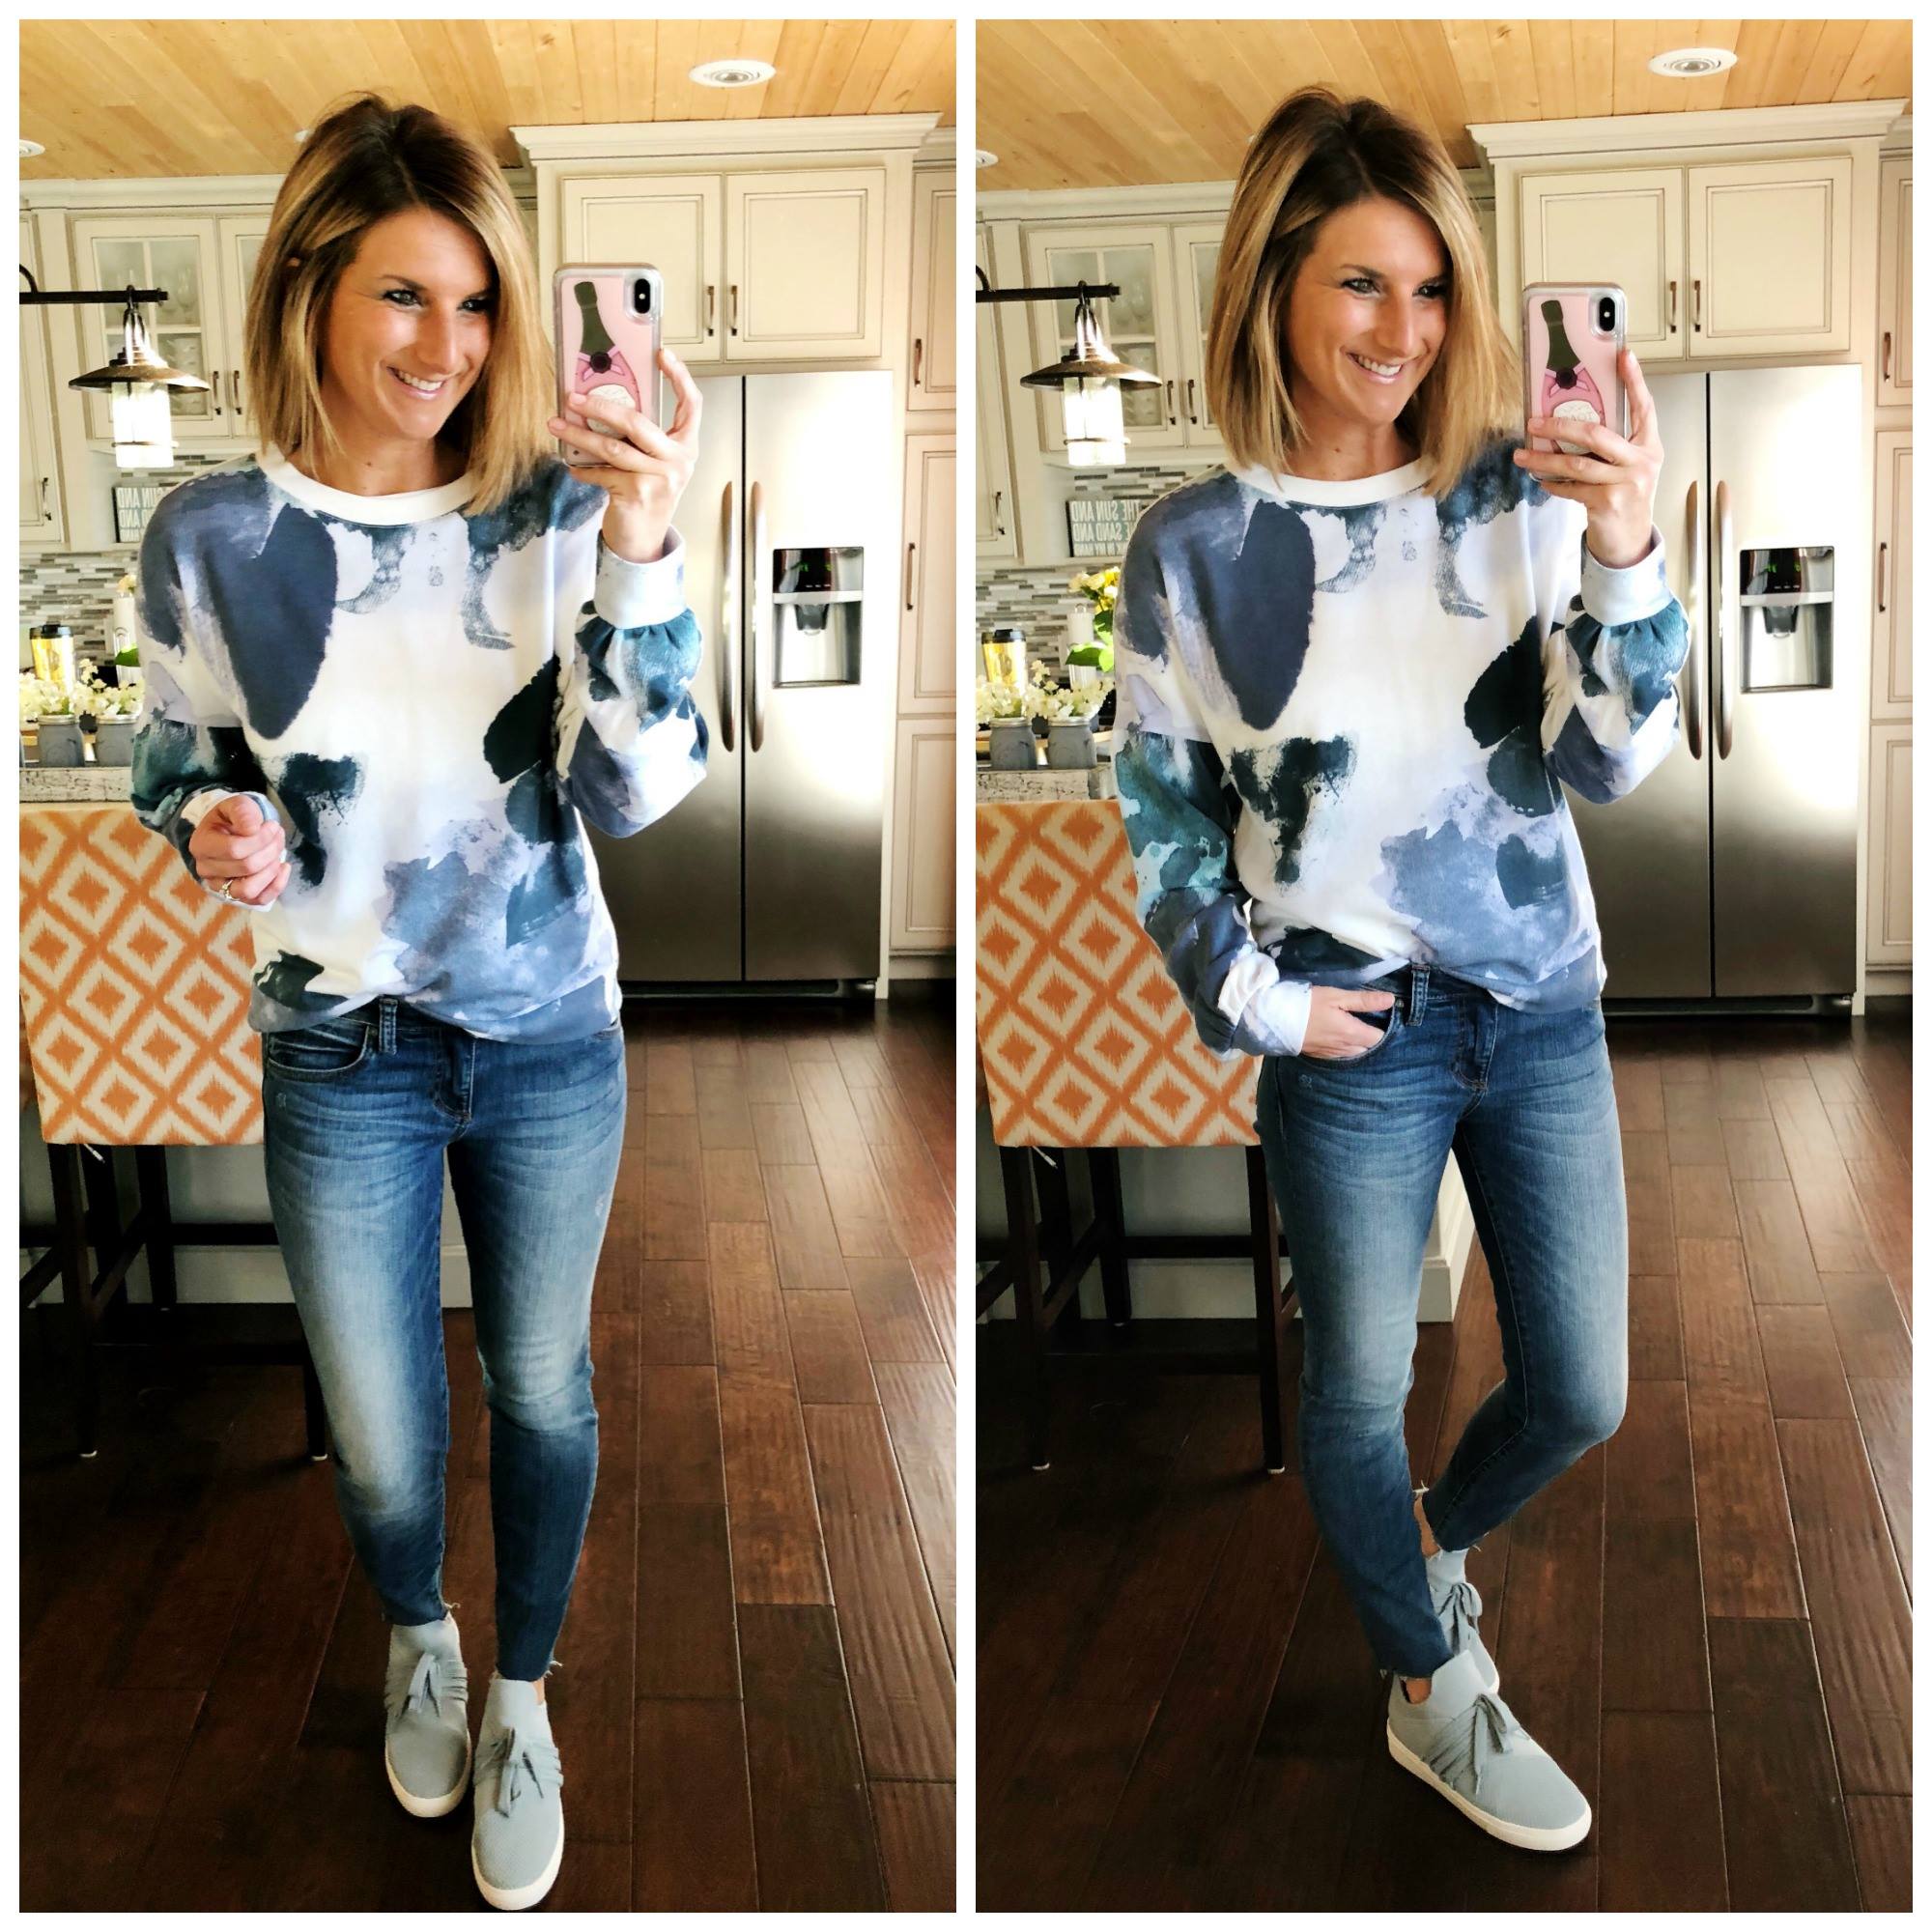 Watercolor Sweatshirt + Light Wash Jeggings + Light Blue Sneakers // Casual Spring Outfit 